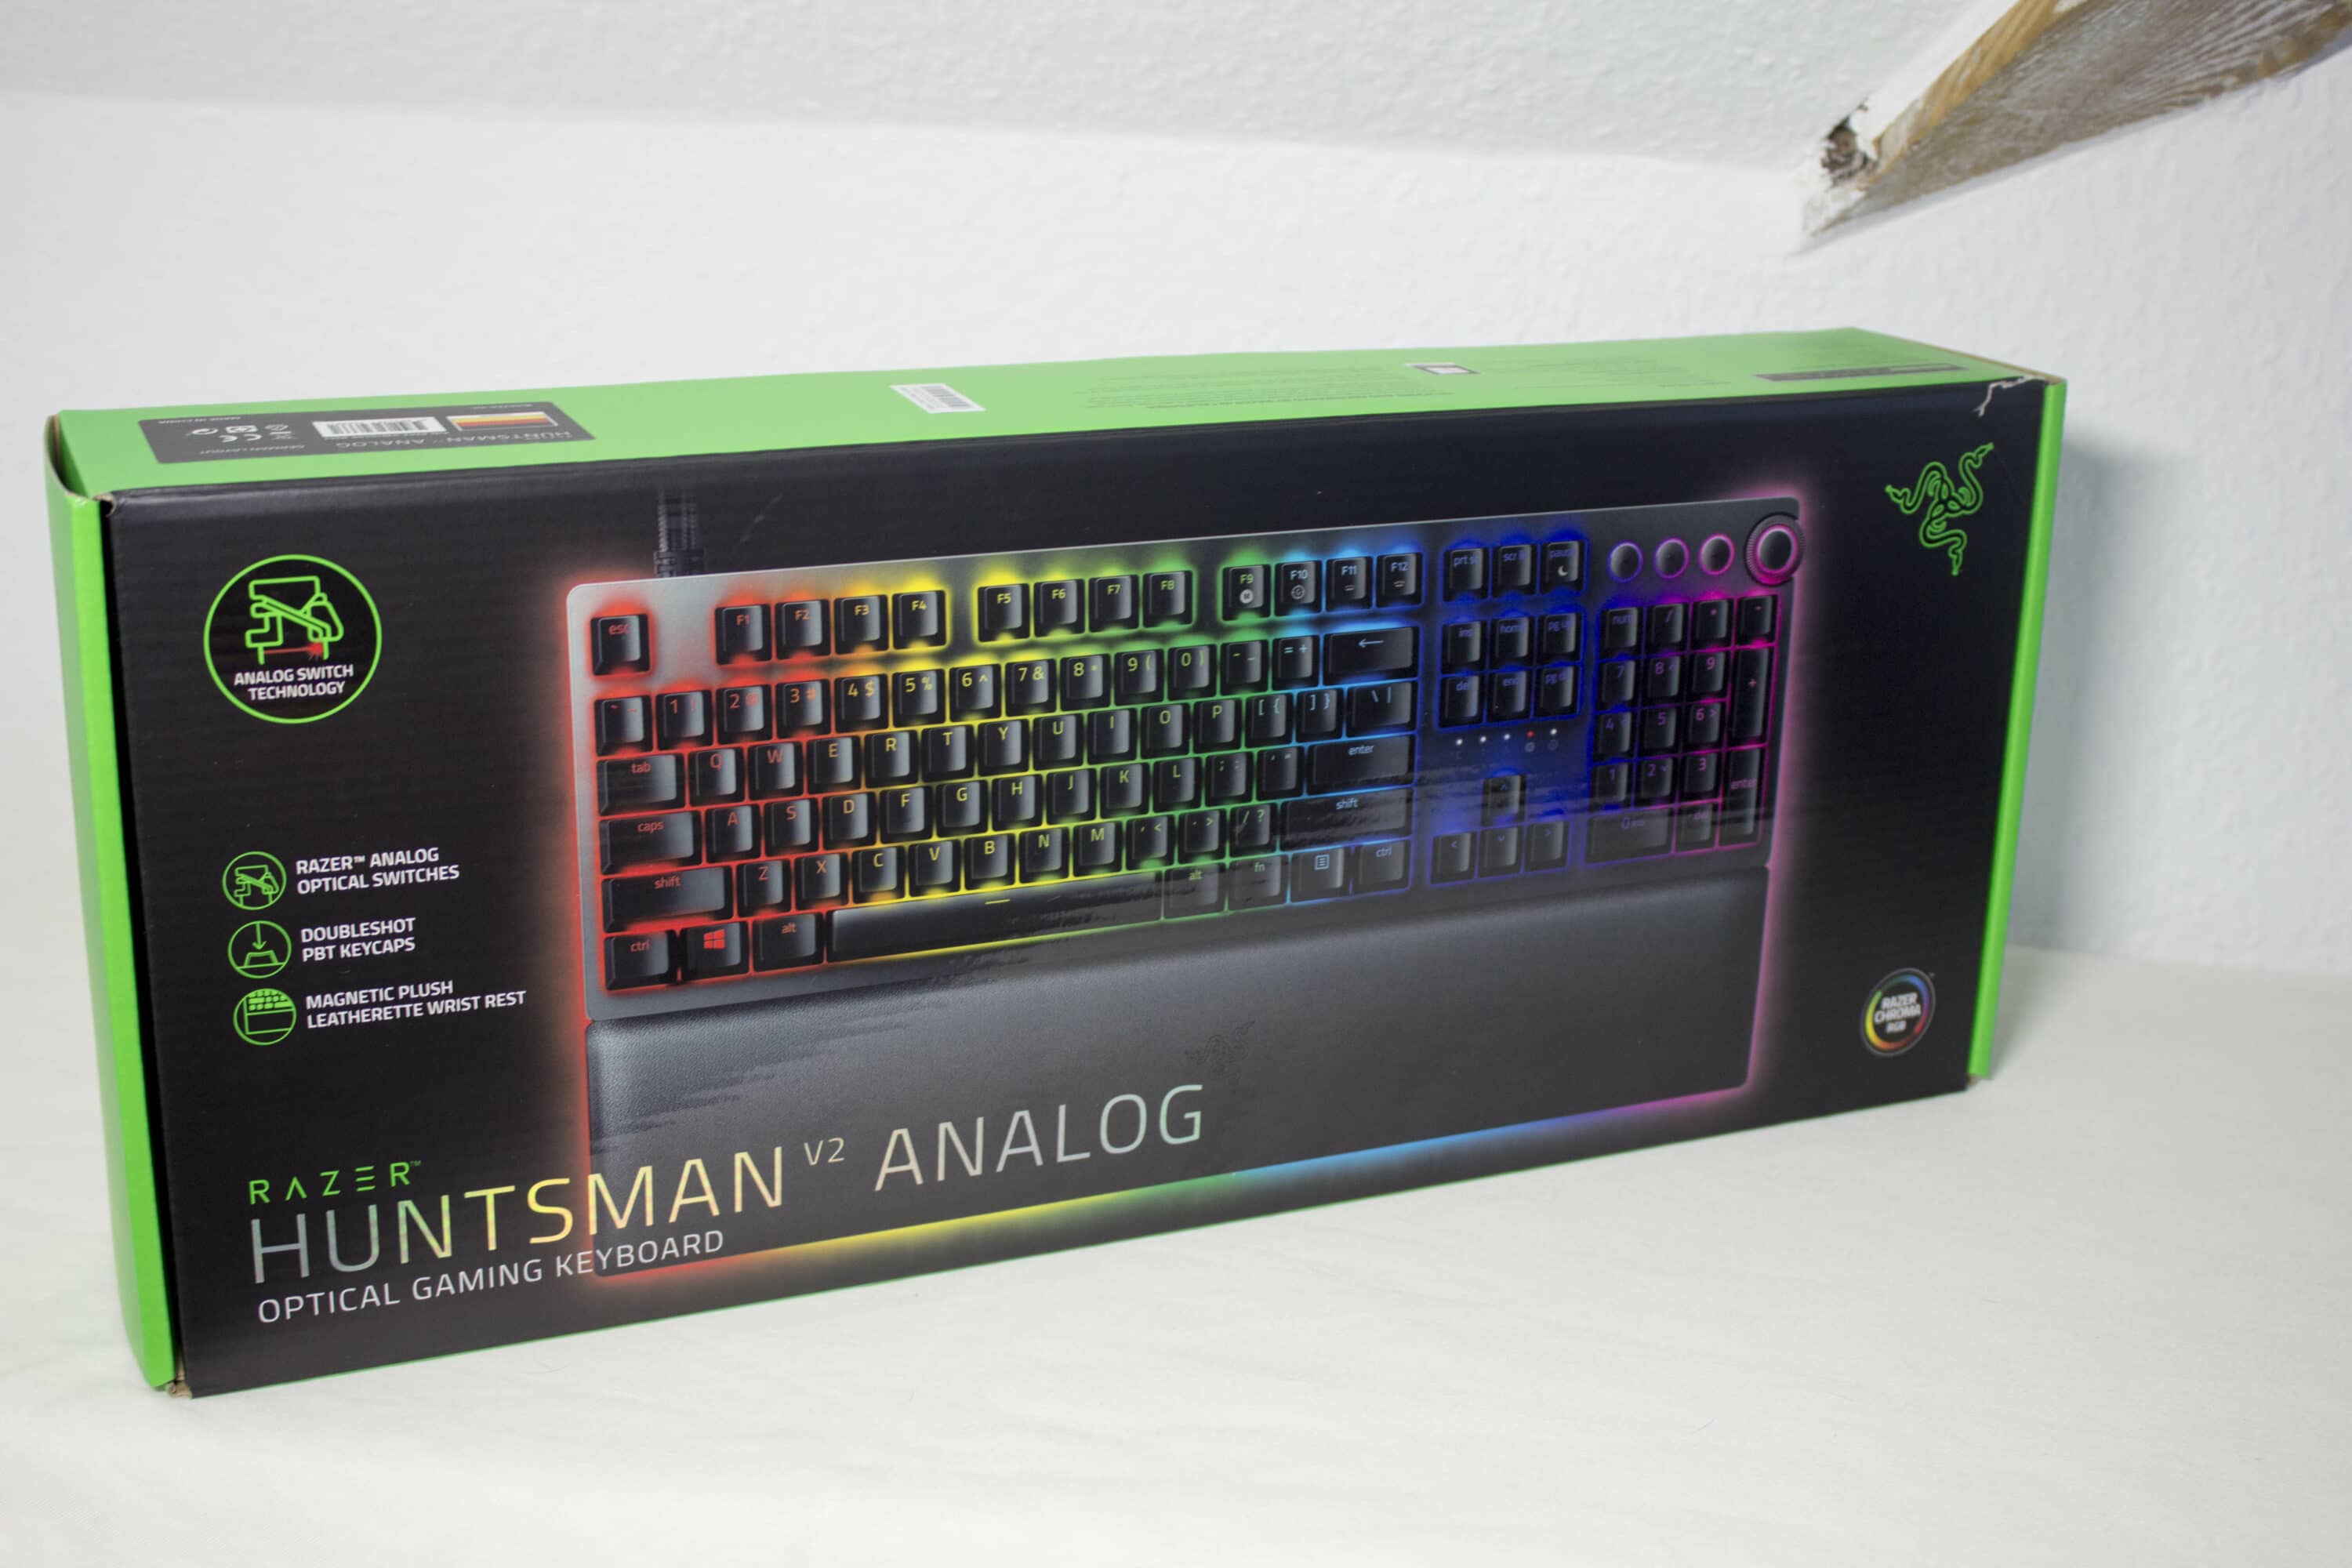 Razer Huntsman V2 Analog in What controllers do in review: common? and keyboards have